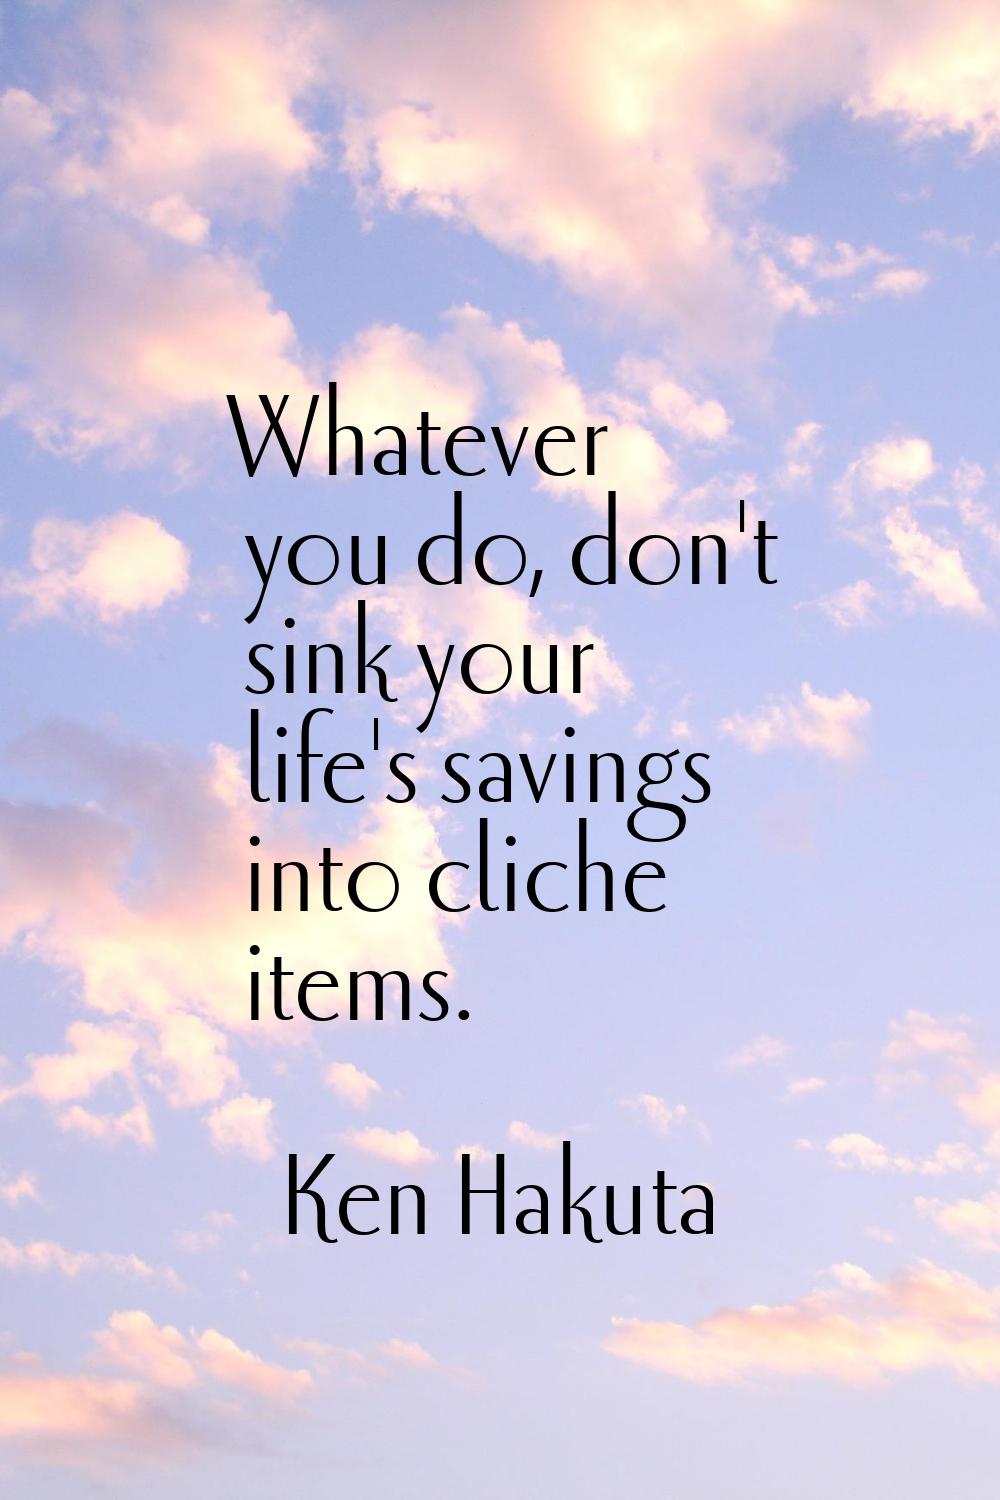 Whatever you do, don't sink your life's savings into cliche items.